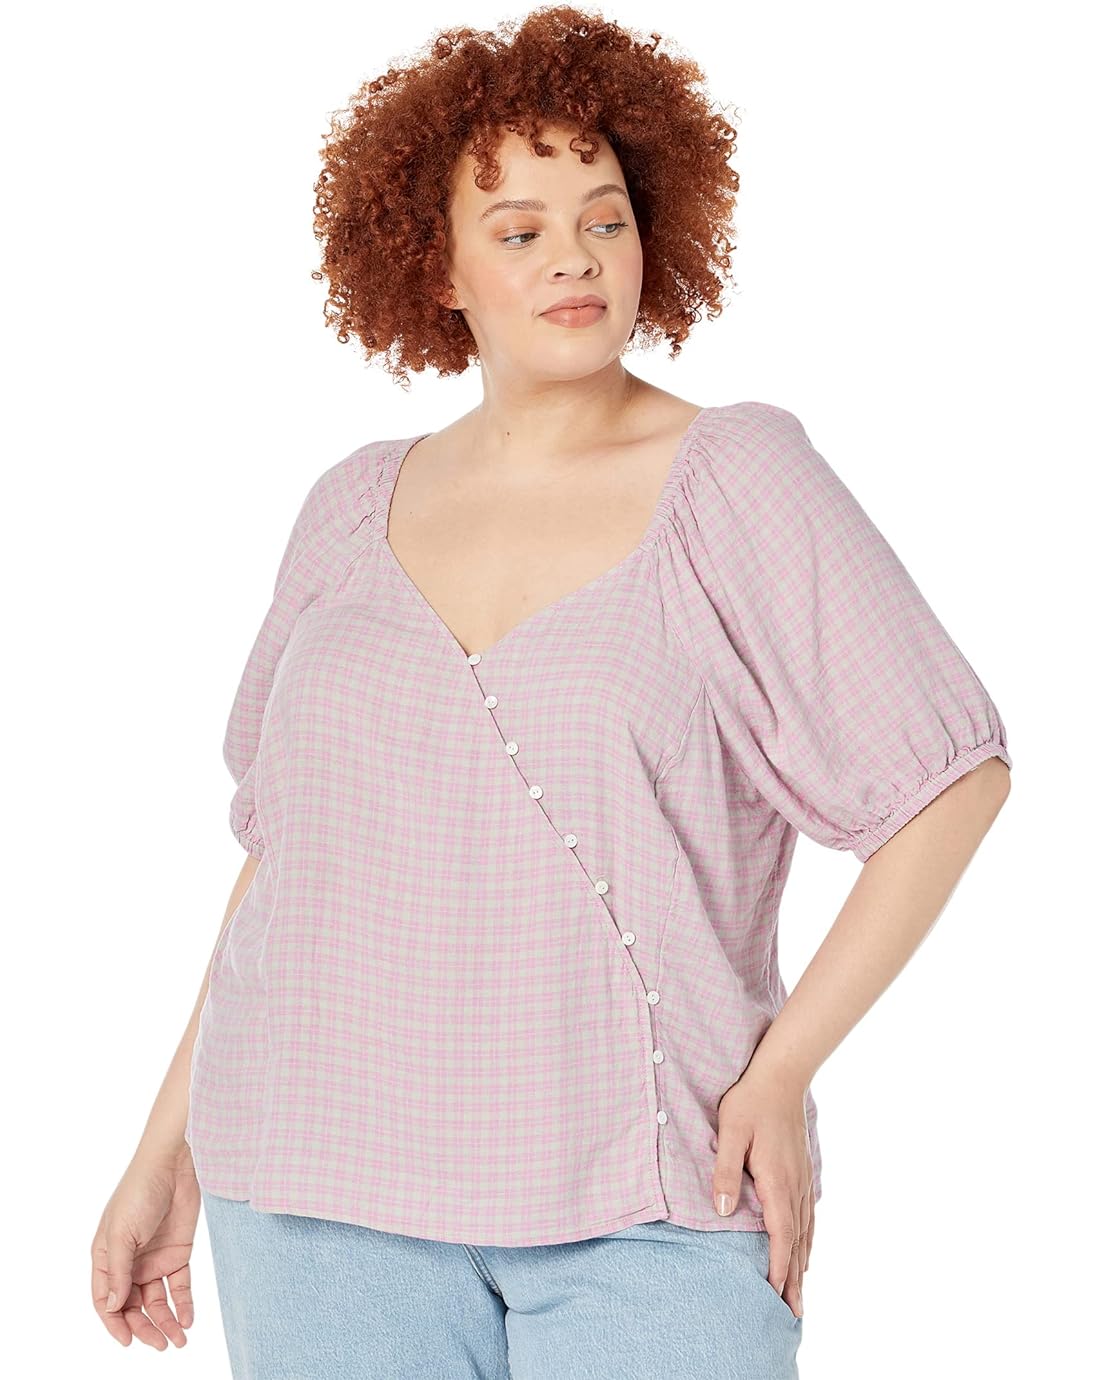 Madewell Plus Size Cora Top - Chinating Linen